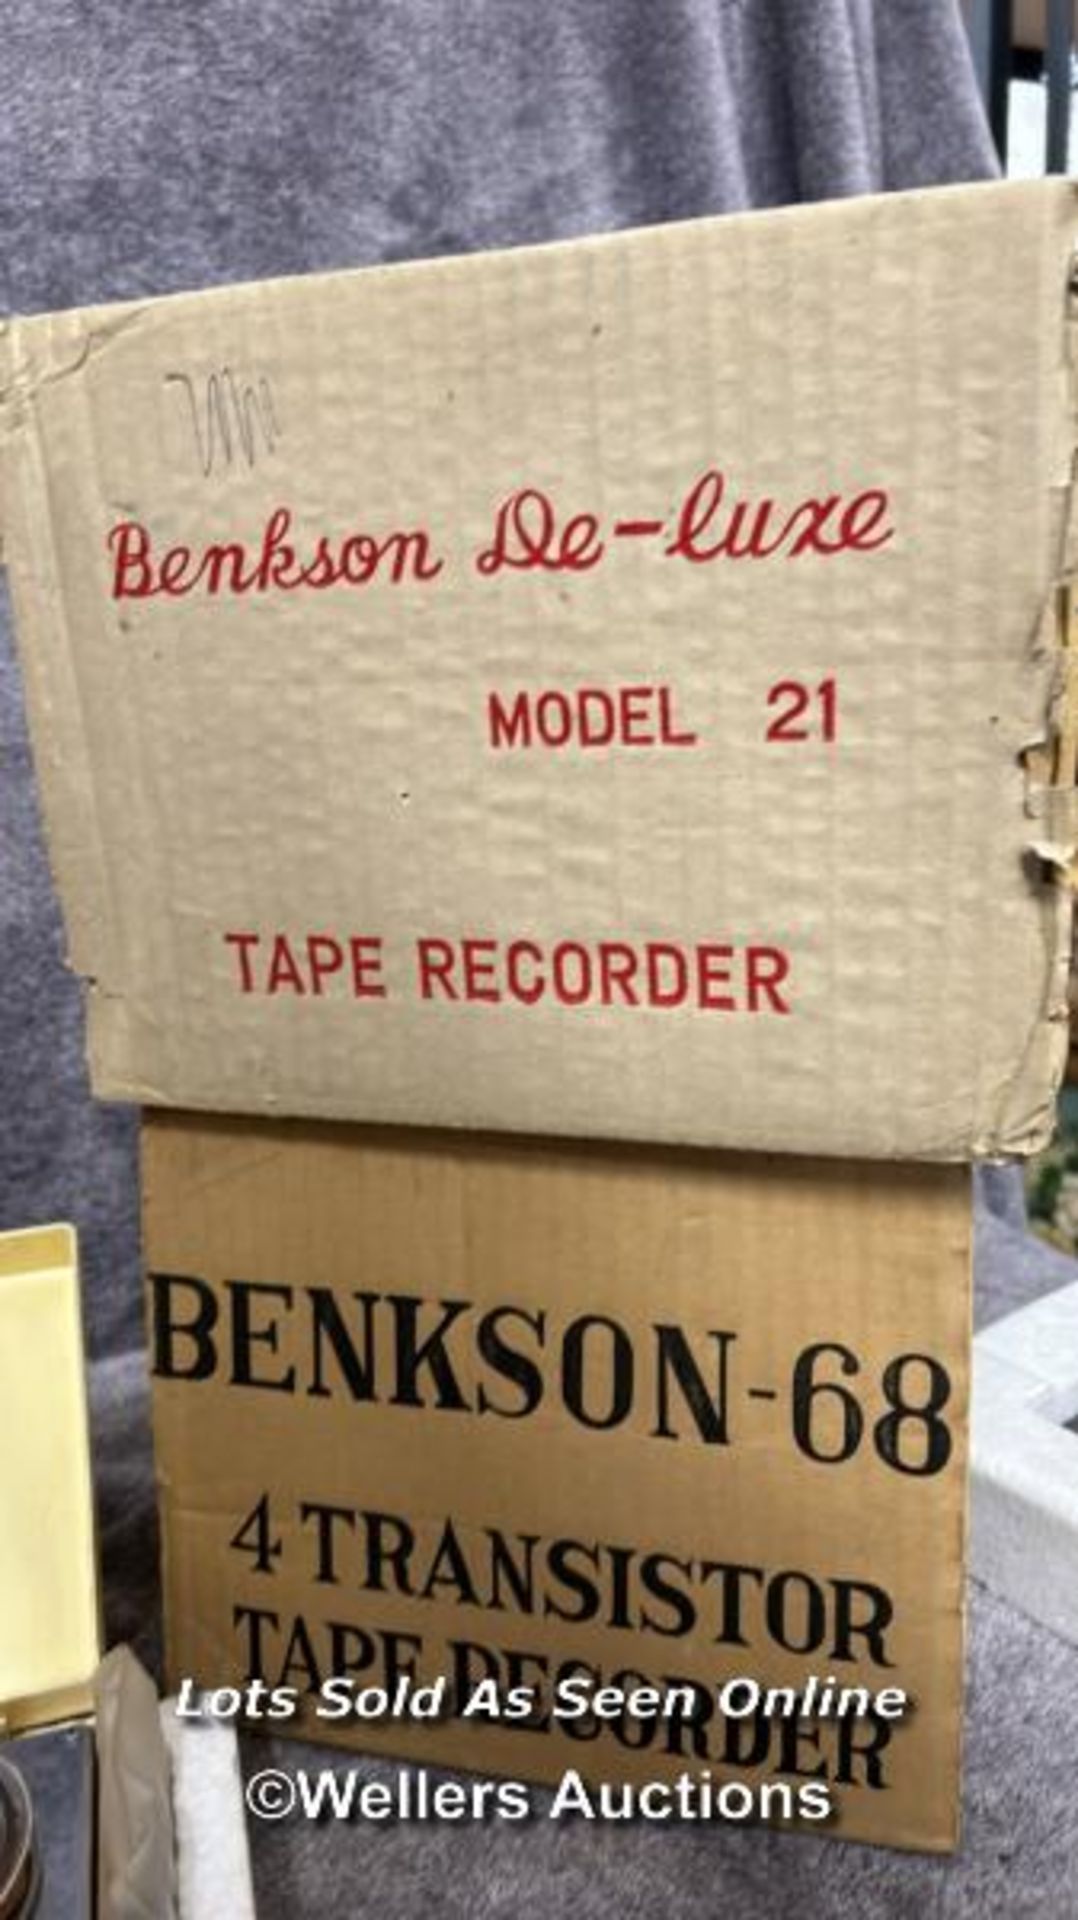 Three vintage Benkson tape recorders including de-luxe model 21, from the private collection of - Image 5 of 5